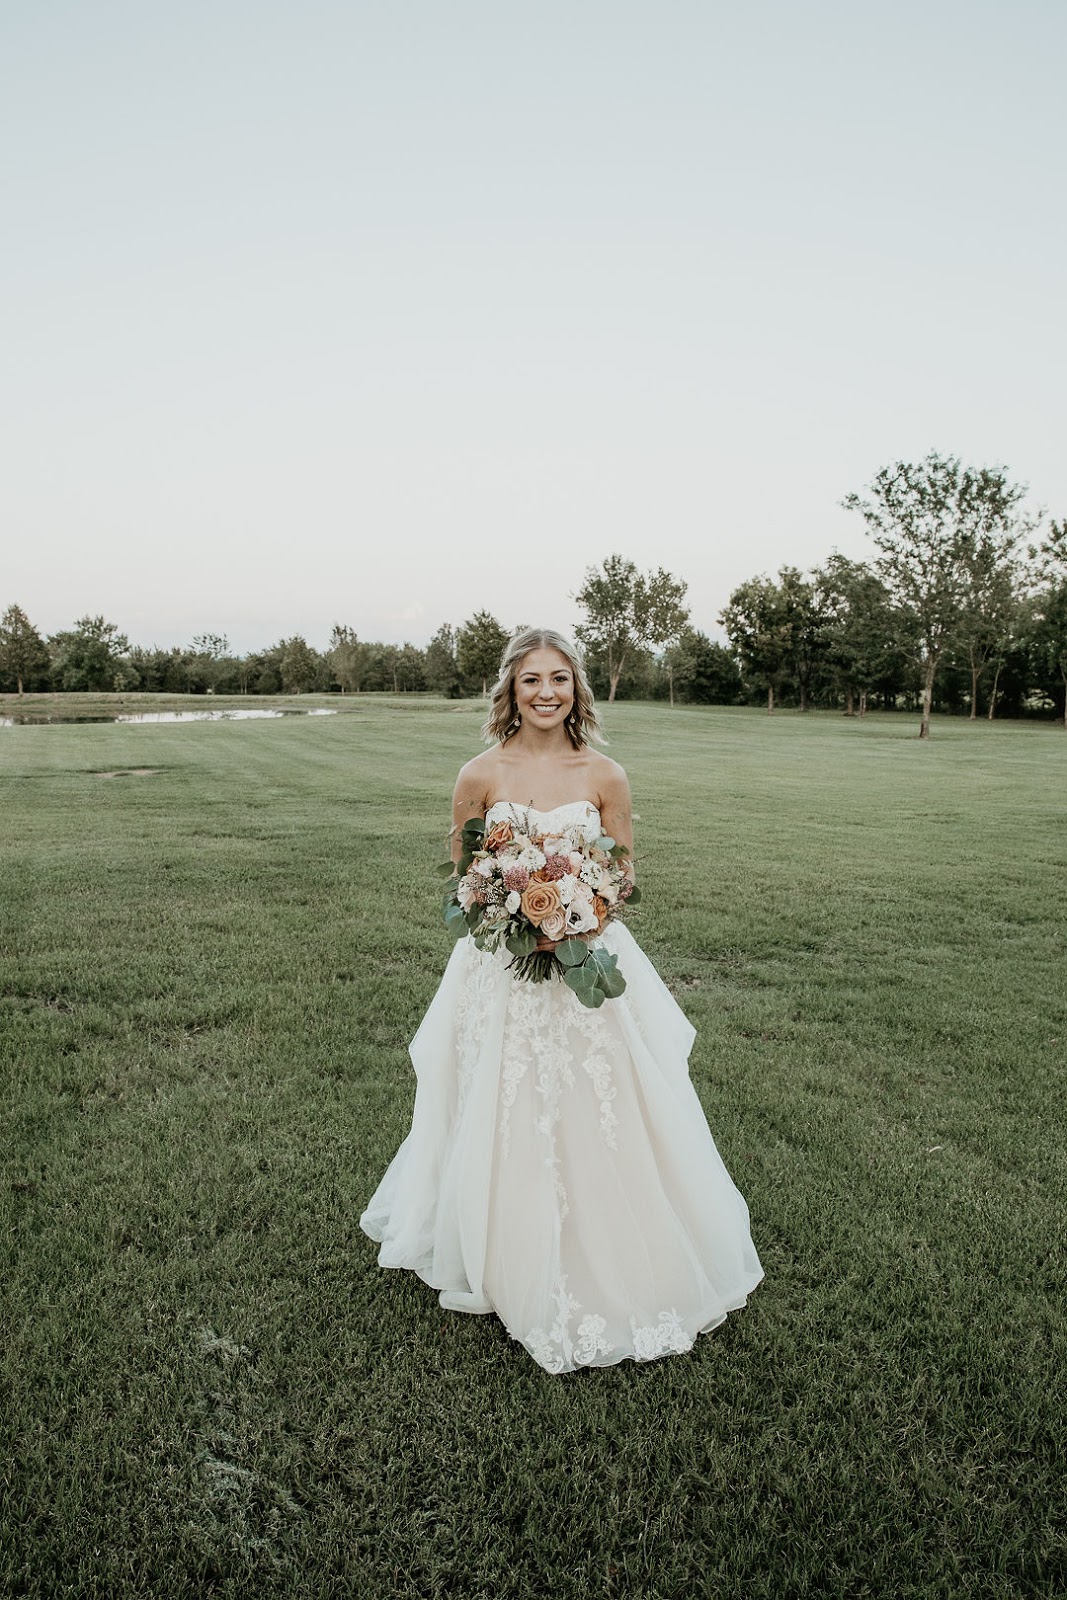 Solo image of bride in dress holding bouquet